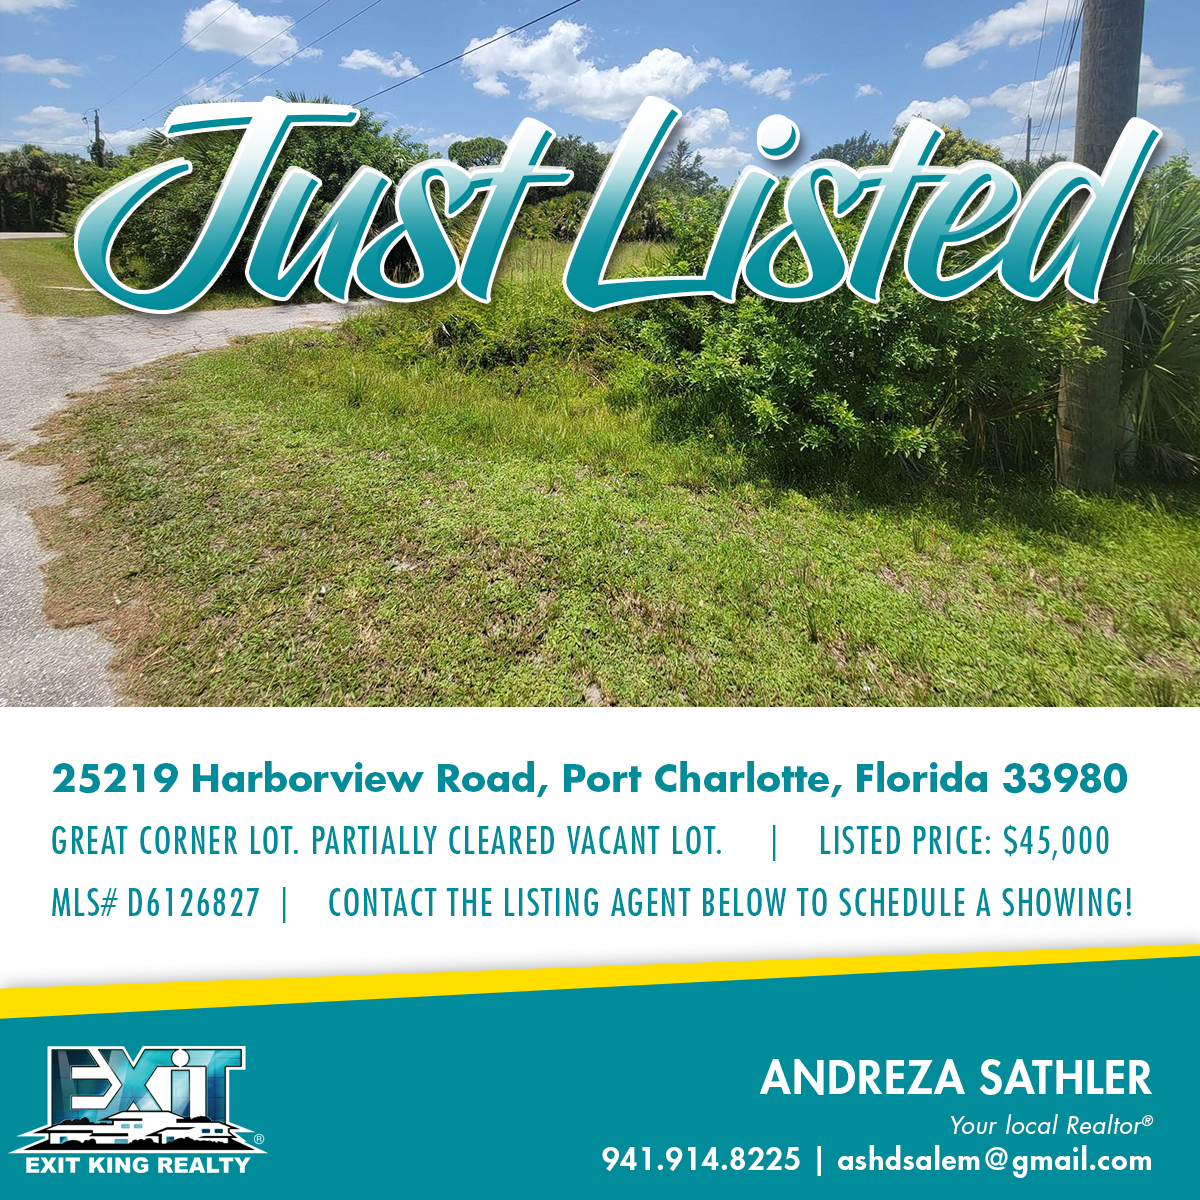 25219 Harborview Road, Port Charlotte, Florida 33980
$45,000
Great Corner Lot! Partially Cleared Vacant Lot! Don't miss this opportunity! 
MLS Number: D6126827

#exitking #realty #homeforsale #florida #portcharlotterealestate #portcharlotterealtor